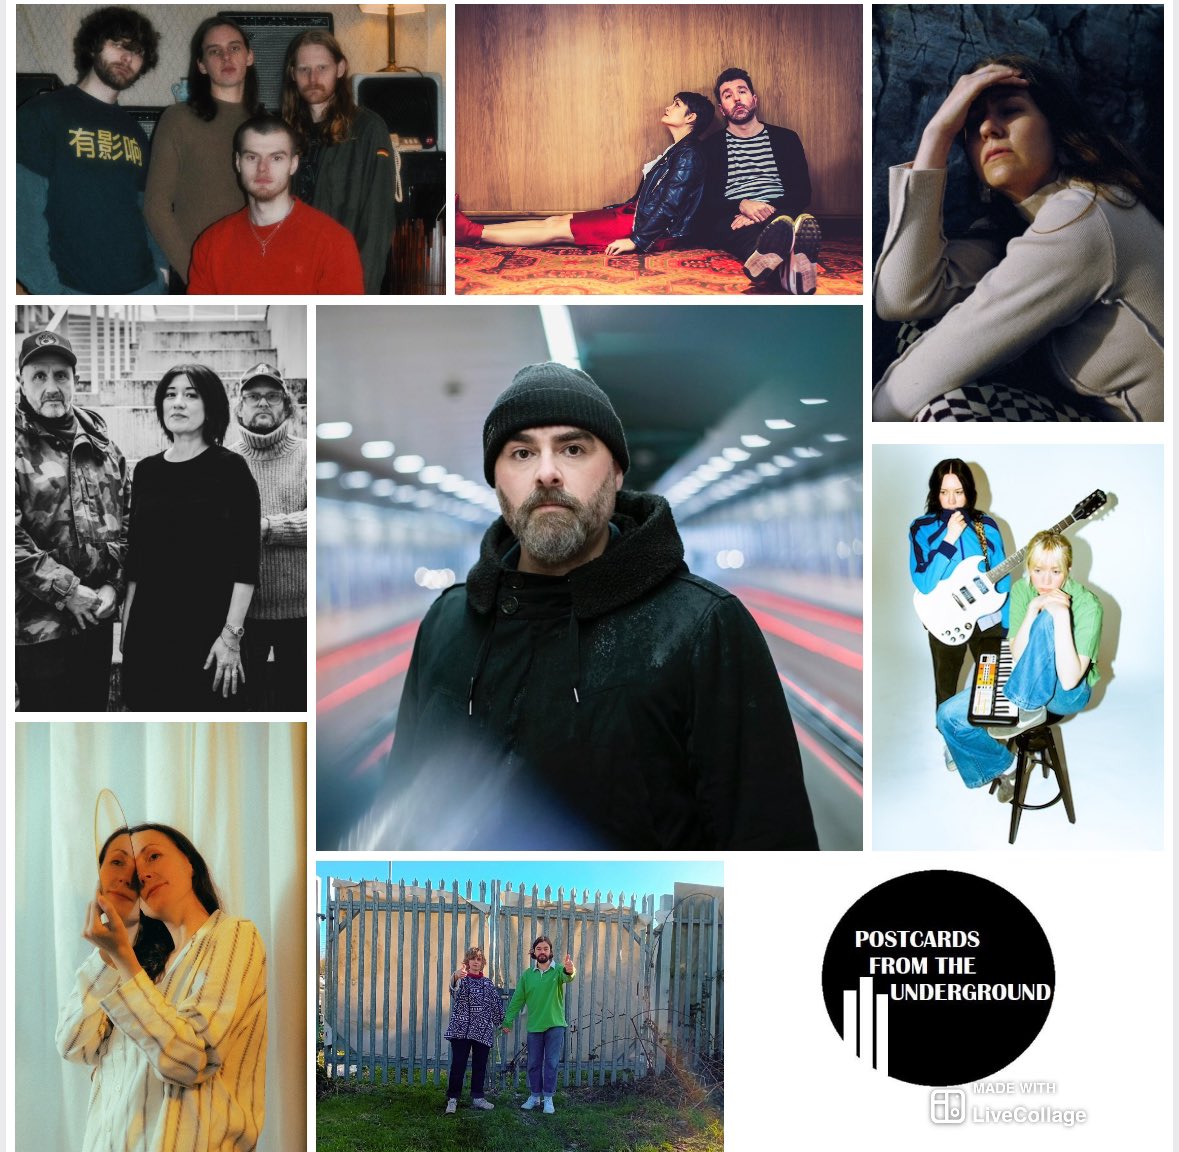 PFTU going out Sun 8pm @CumbernauldFm & Mon 2pm in US on @indiexfm Or catch anytime via mixcloud.com/PFTU/pftu-125/ This week ft @thebandpolly @fomachete @aliceboman @7ebra_ @ToddlerSounds @berenyi_miki @constantfollowr ❤️❤️❤️